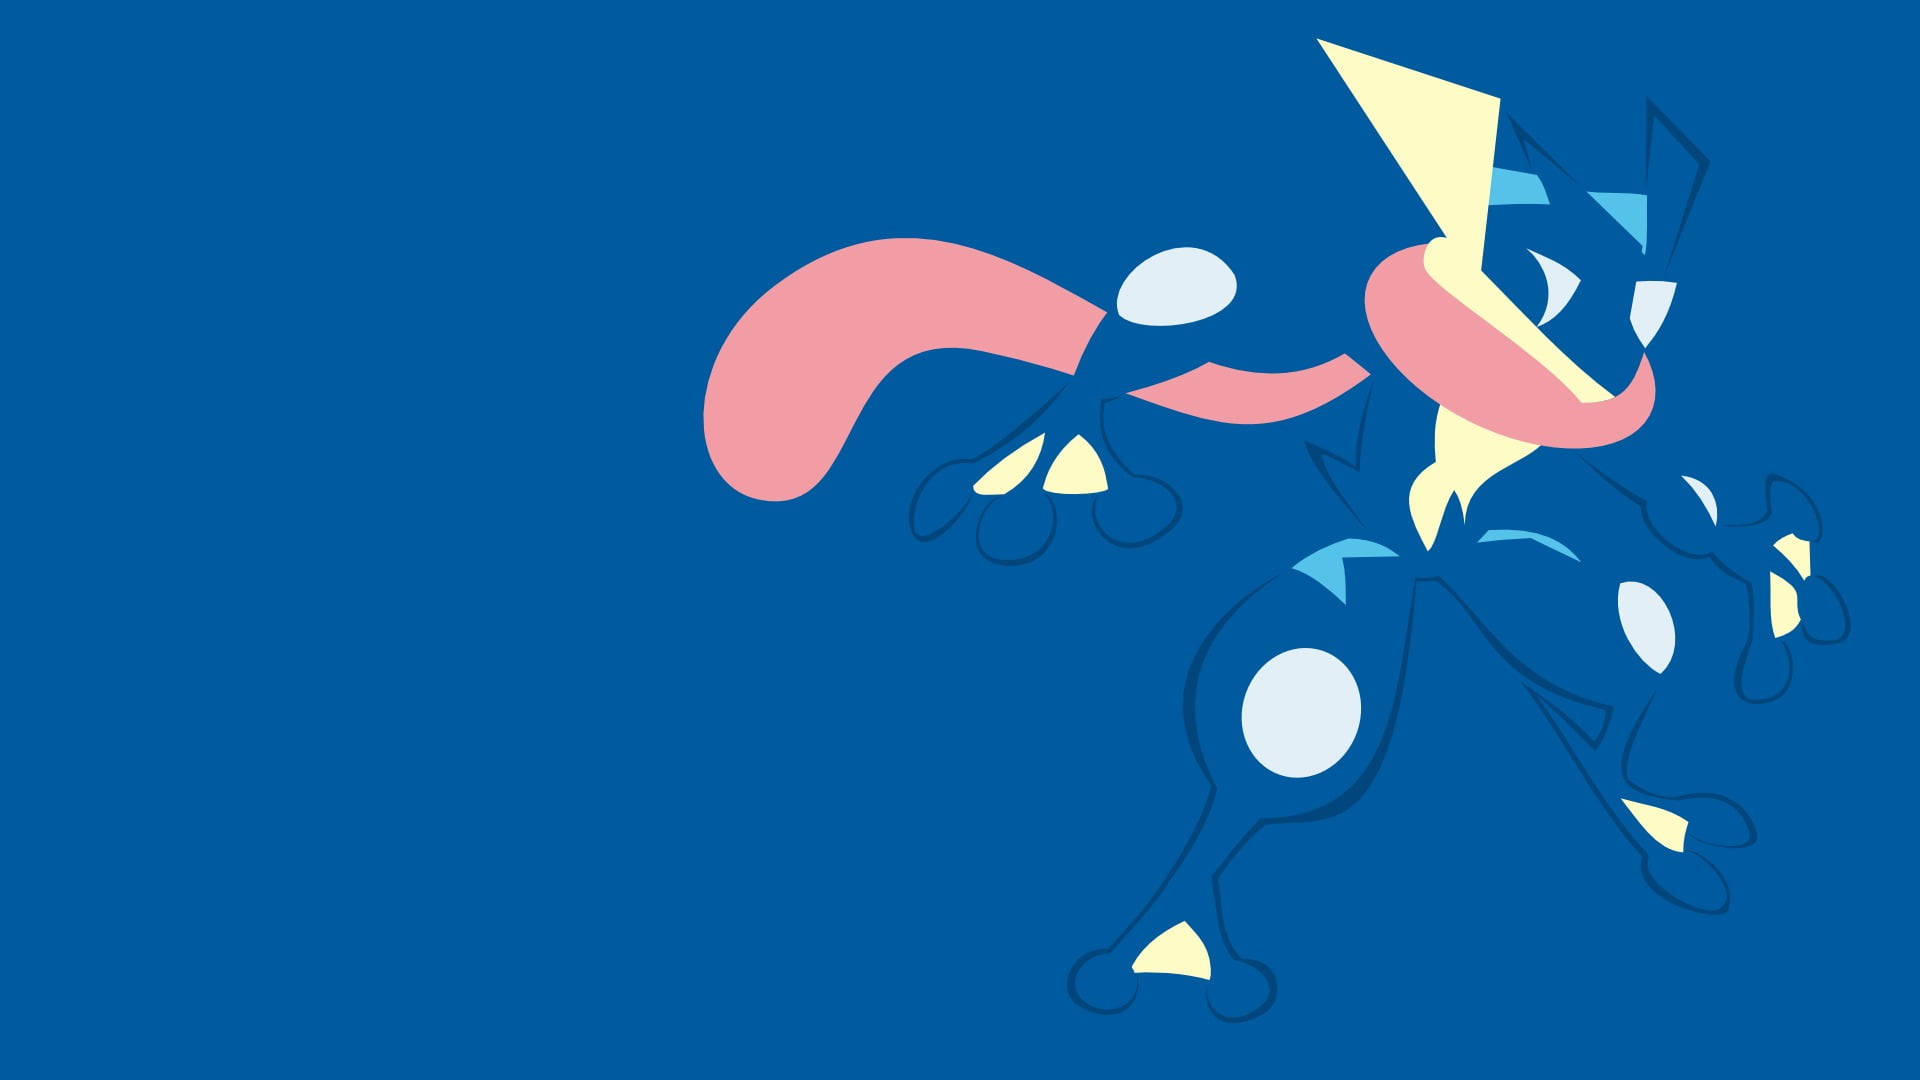 Get Ready for Battle with Greninja Wallpaper